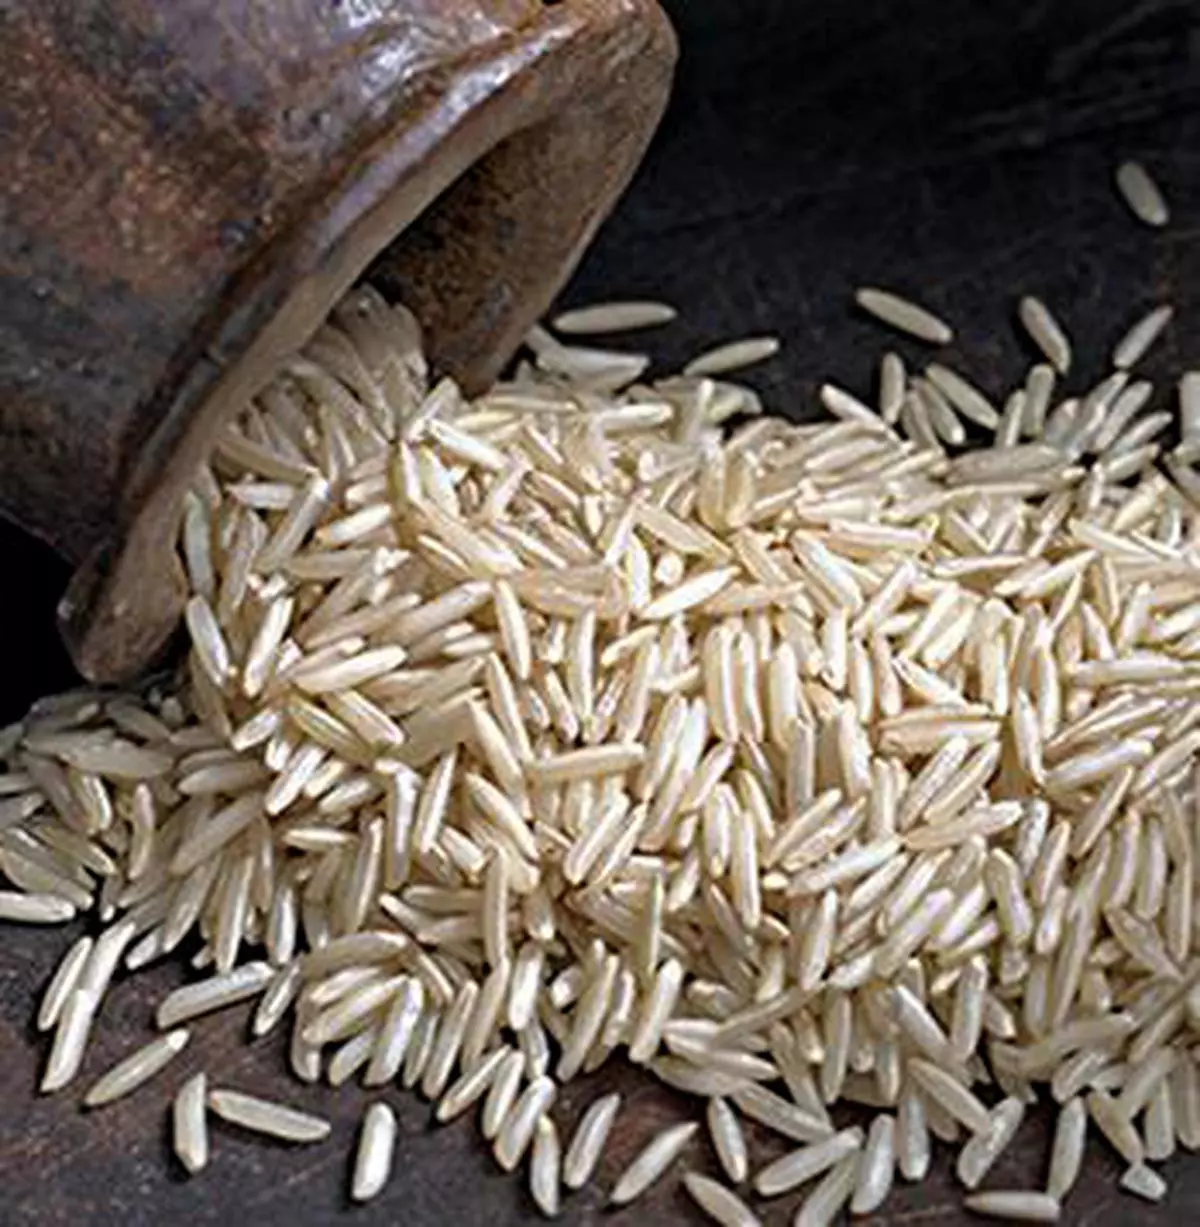 Australia rejected granting GI tag on the grounds that basmati rice is not grown only in India. 